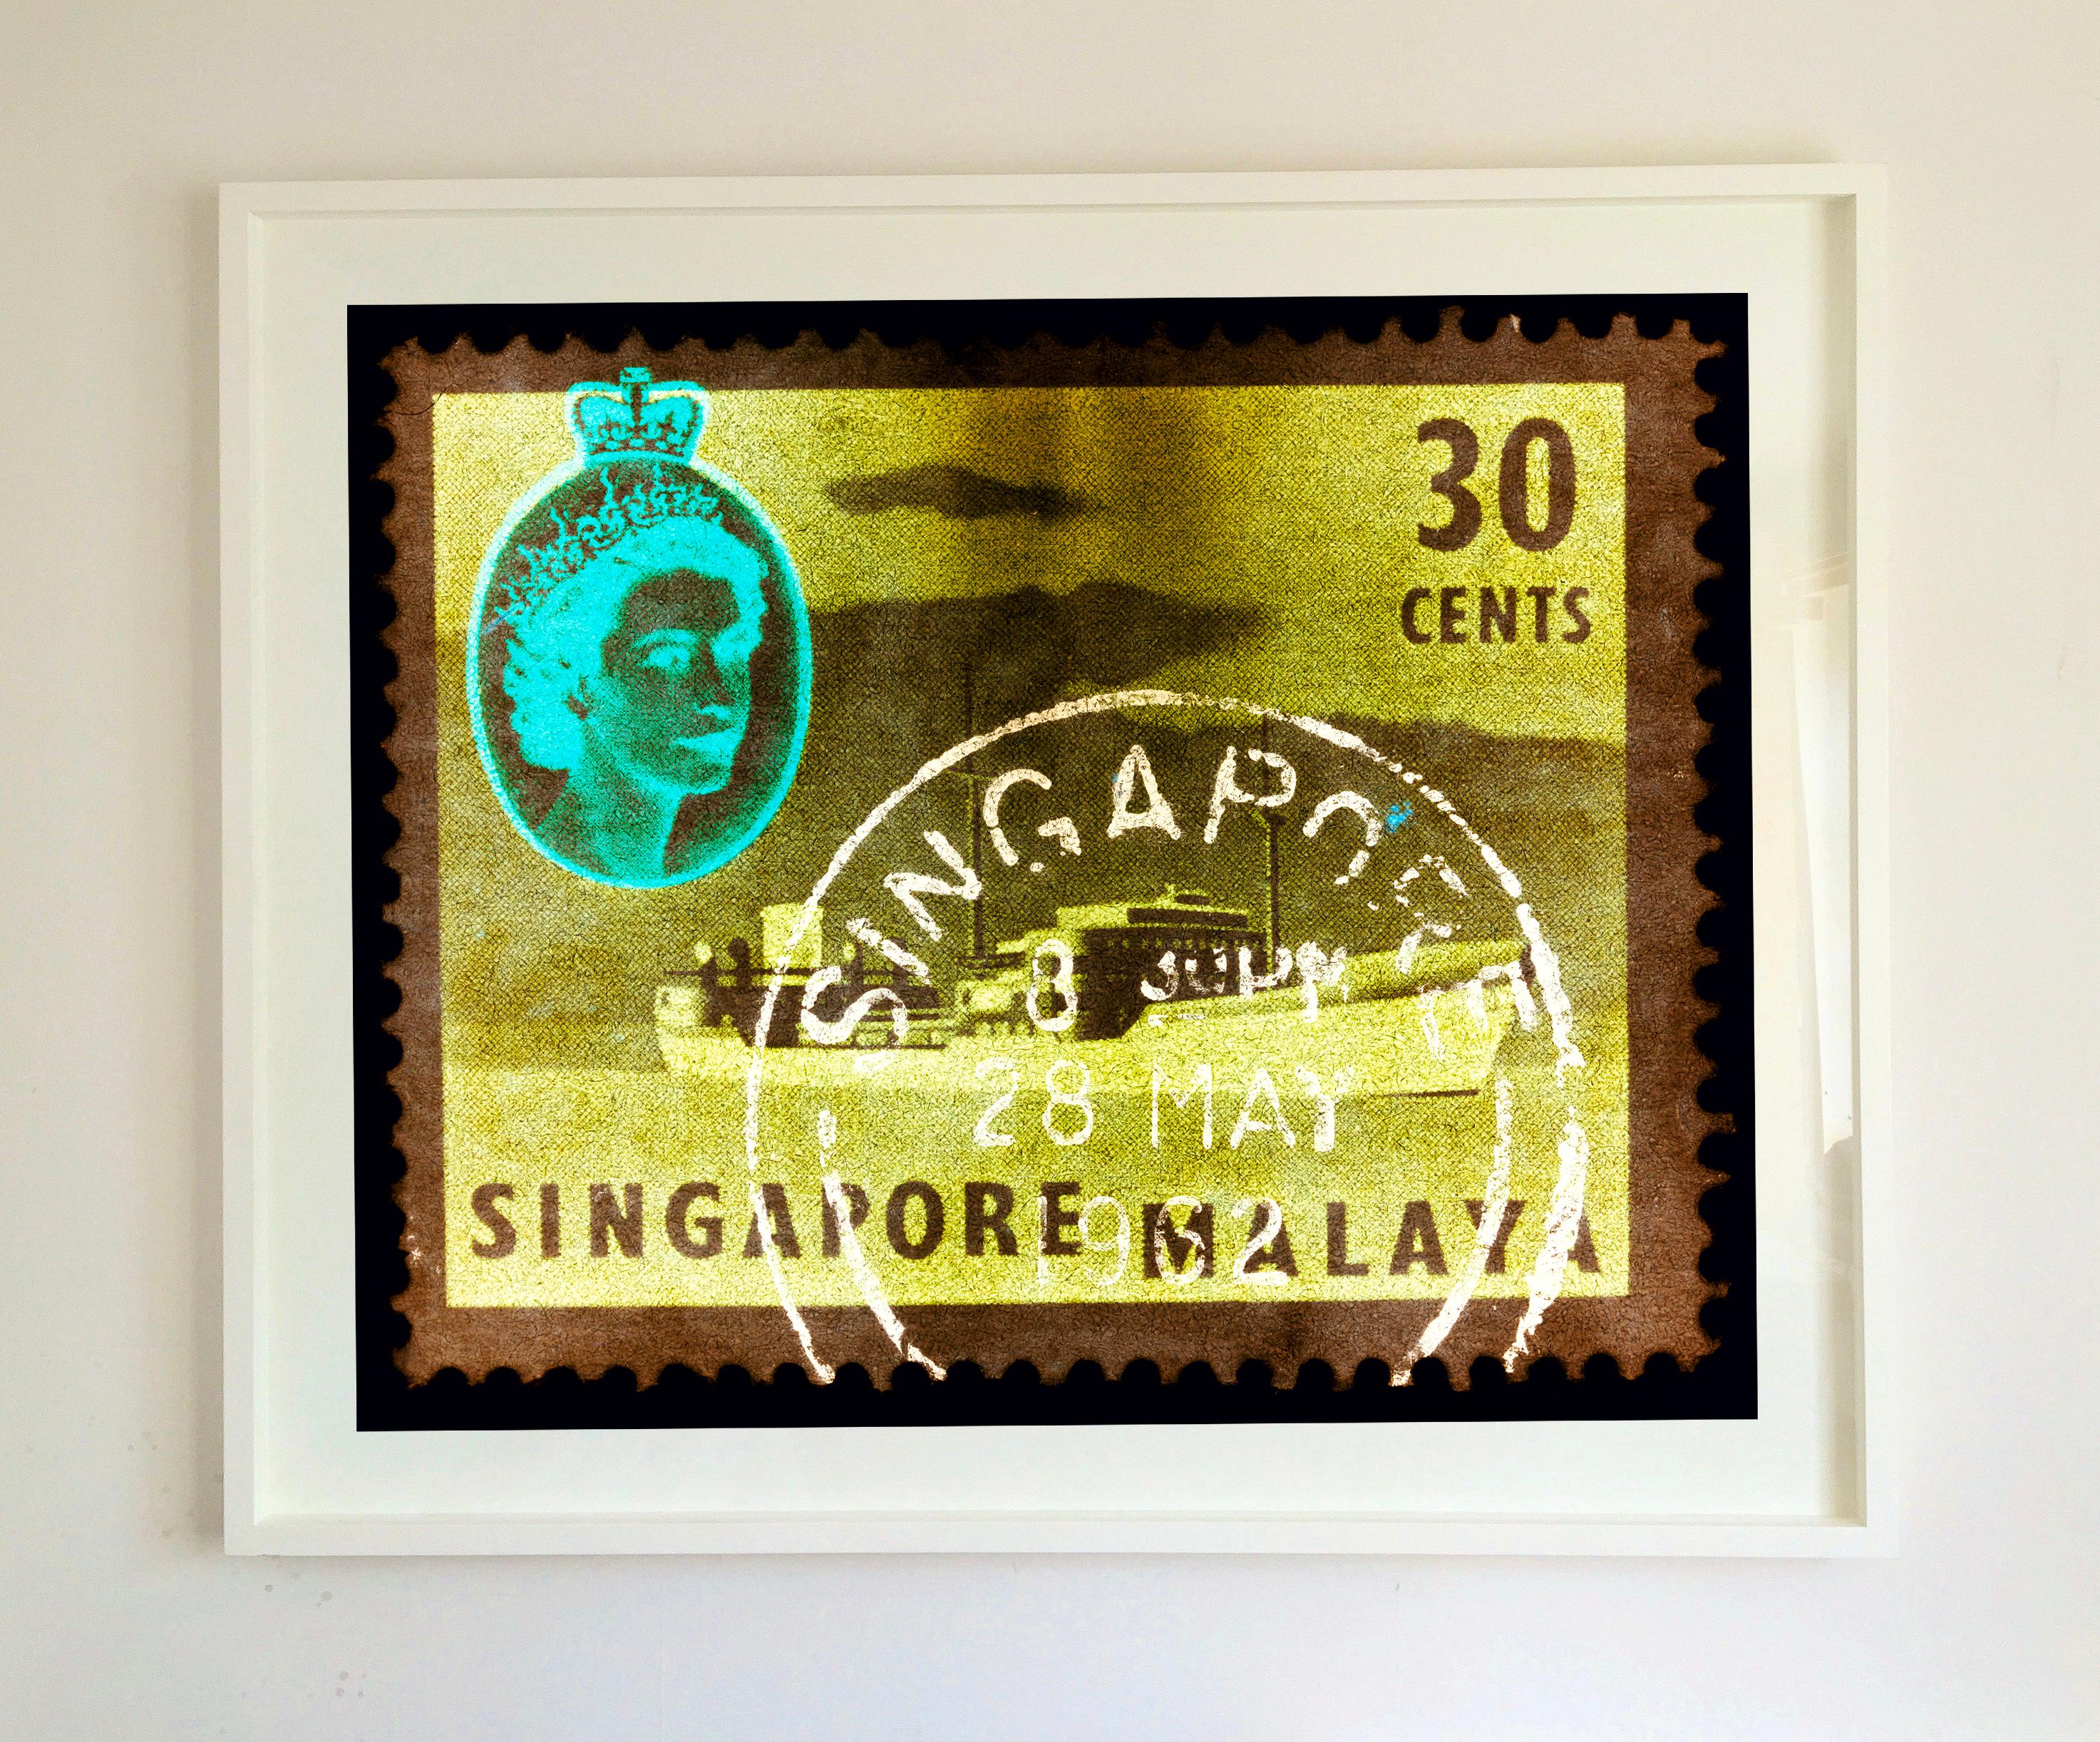 Heidler & Heeps Singapore Stamp Collection, 30 Cents QEII Oil Tanker Khaki. From the 2018 Singapore Series, Postcards from afar.

This artwork is a limited edition of 25, gloss photographic print, dry-mounted to aluminium, presented in a choice of